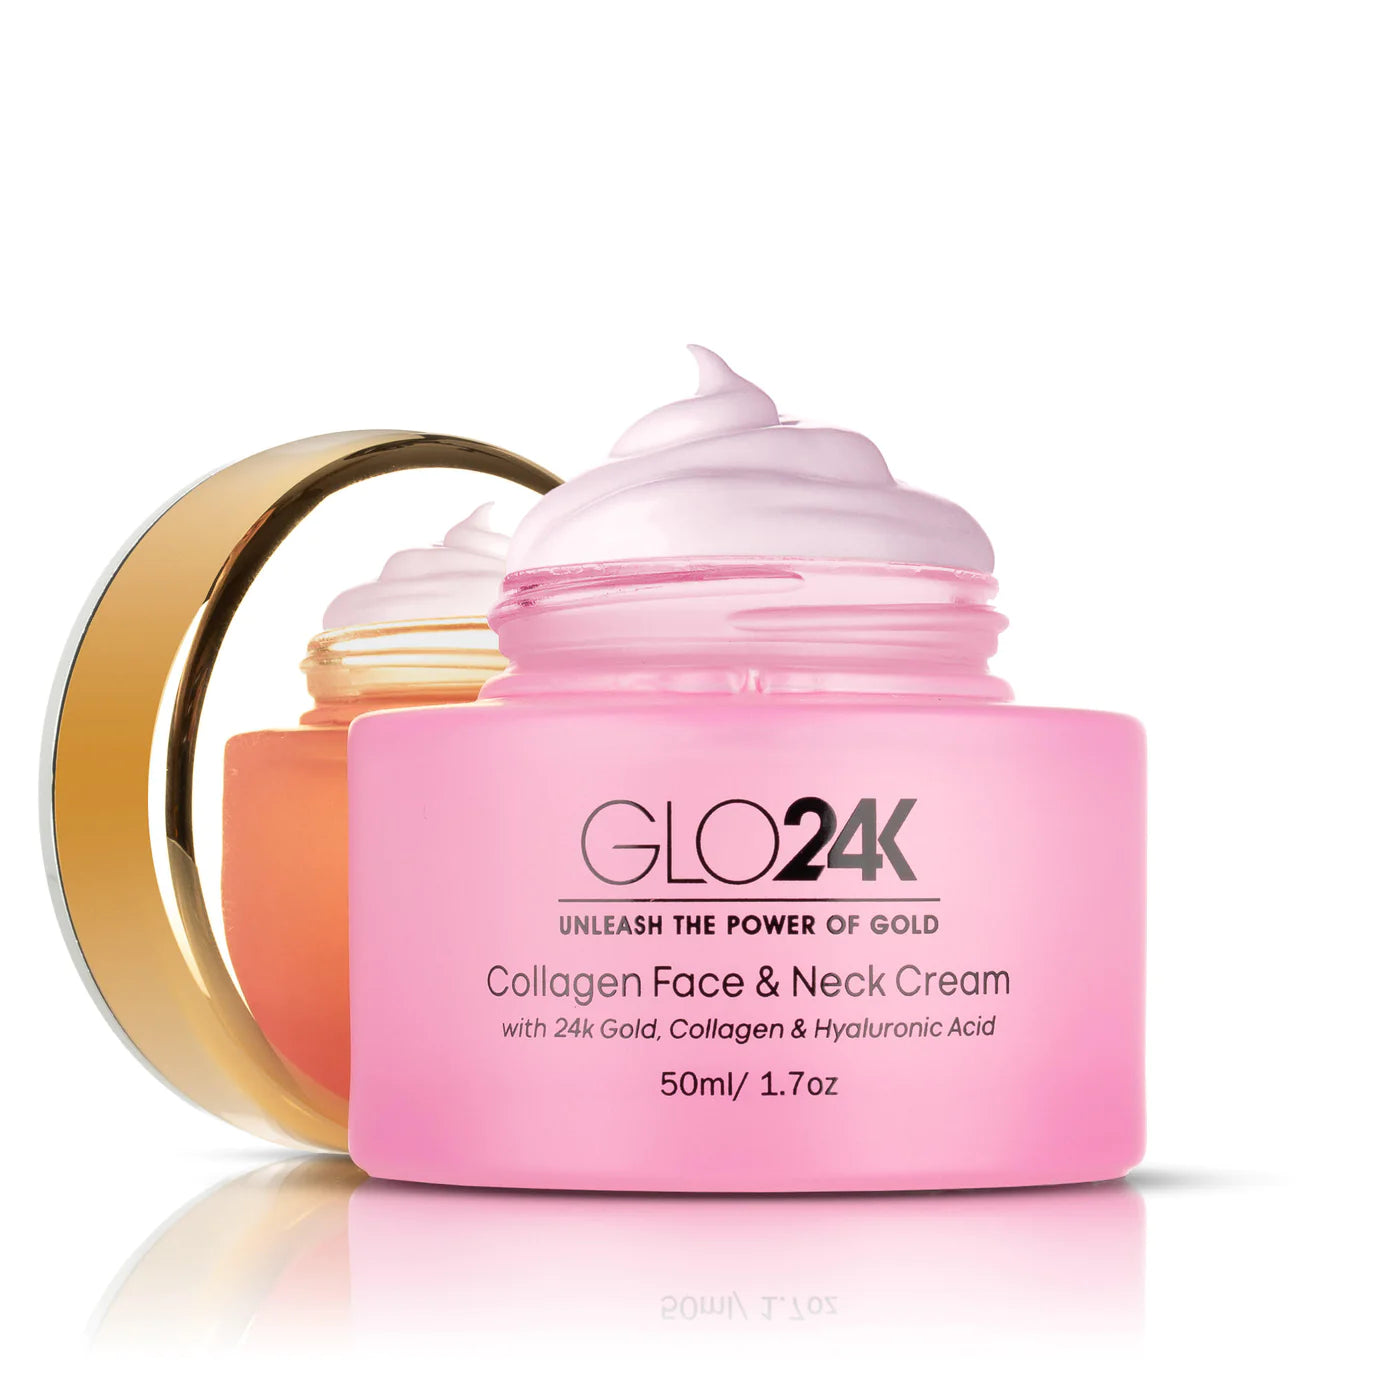 GLO24K Collagen Face &amp; Neck Cream, lid open and displaying product